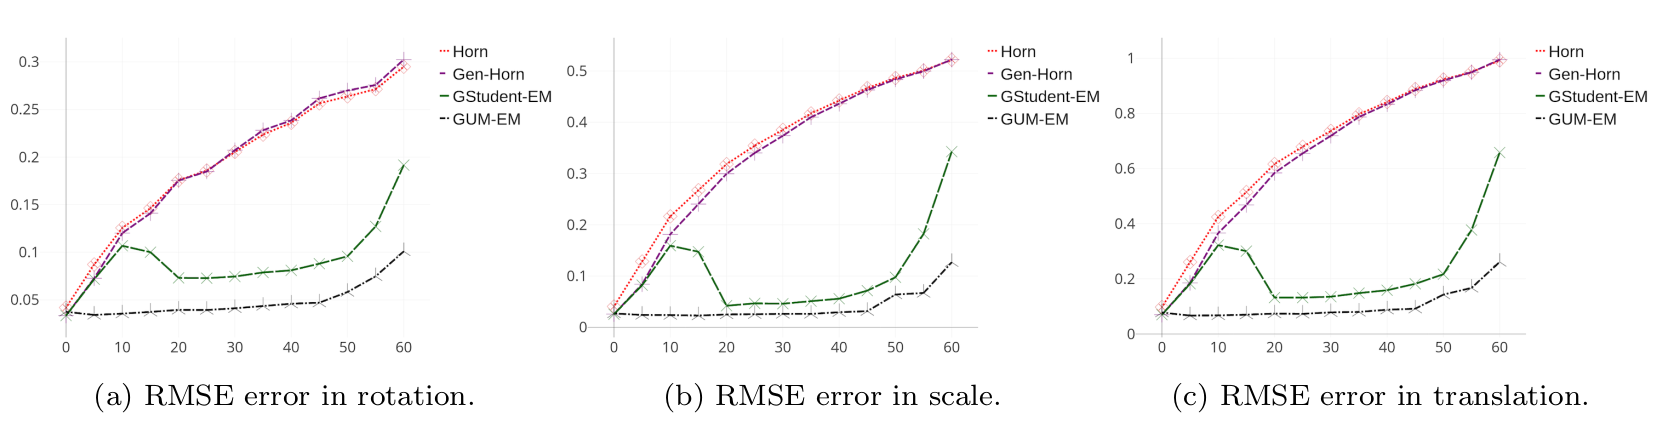 Root mean square error (RMSE error) between the estimated landmarks and the observed ones, as a function of the percentage of occlusions in three different cases: rotation, scale, translation. The error stays relatively small up to 50% occlusion in the case of the two algorithms tested in this study, GUM-EM and GStudent-EM, while two classic methods derived from Gaussian distribution show a constant increase of the RMSE error .